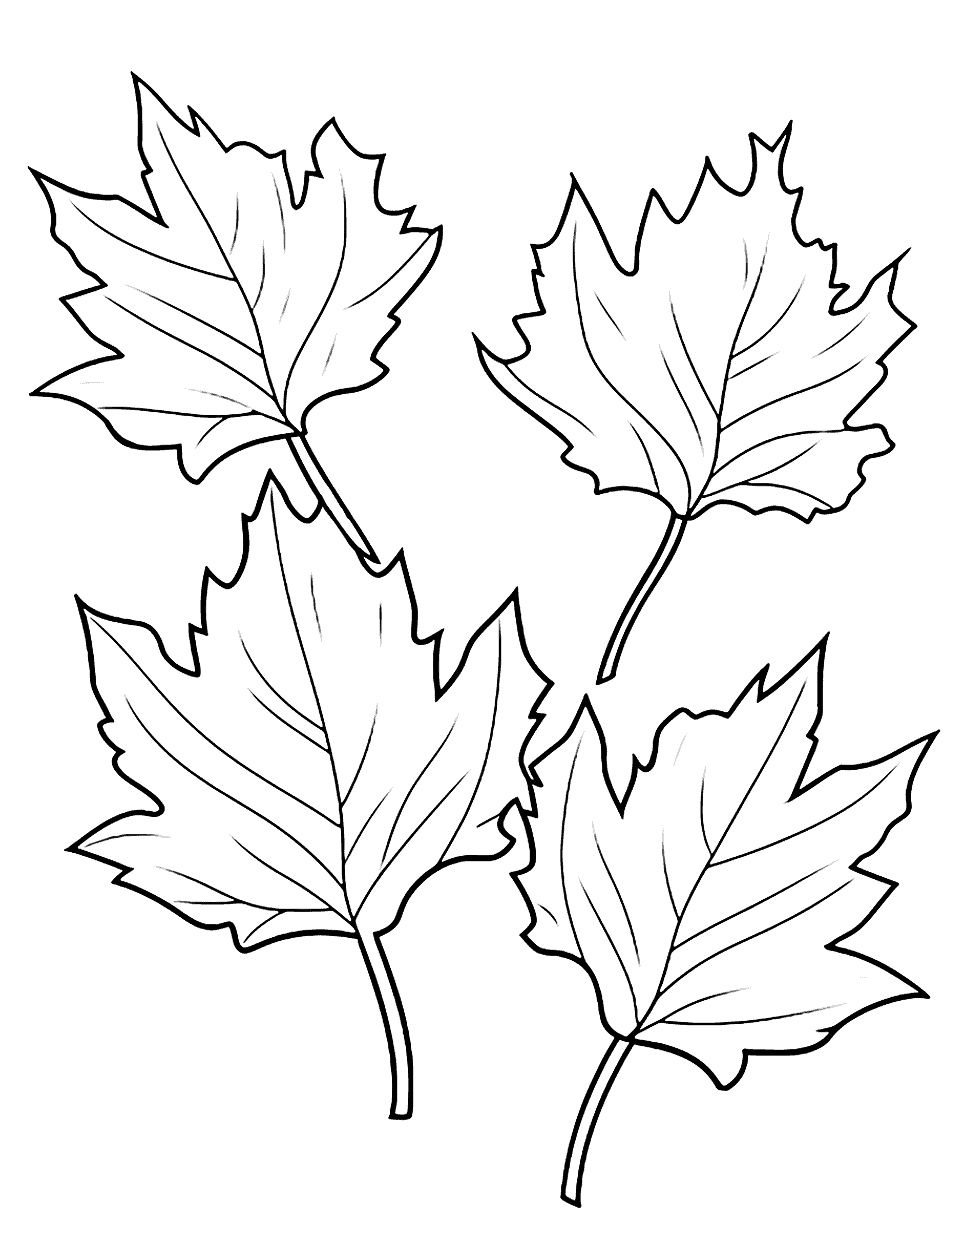 Kindergarten Autumn Leaves Fall Coloring Page - An easy-to-color page filled with autumn leaves, perfect for kindergarten kids to practice their coloring skills.